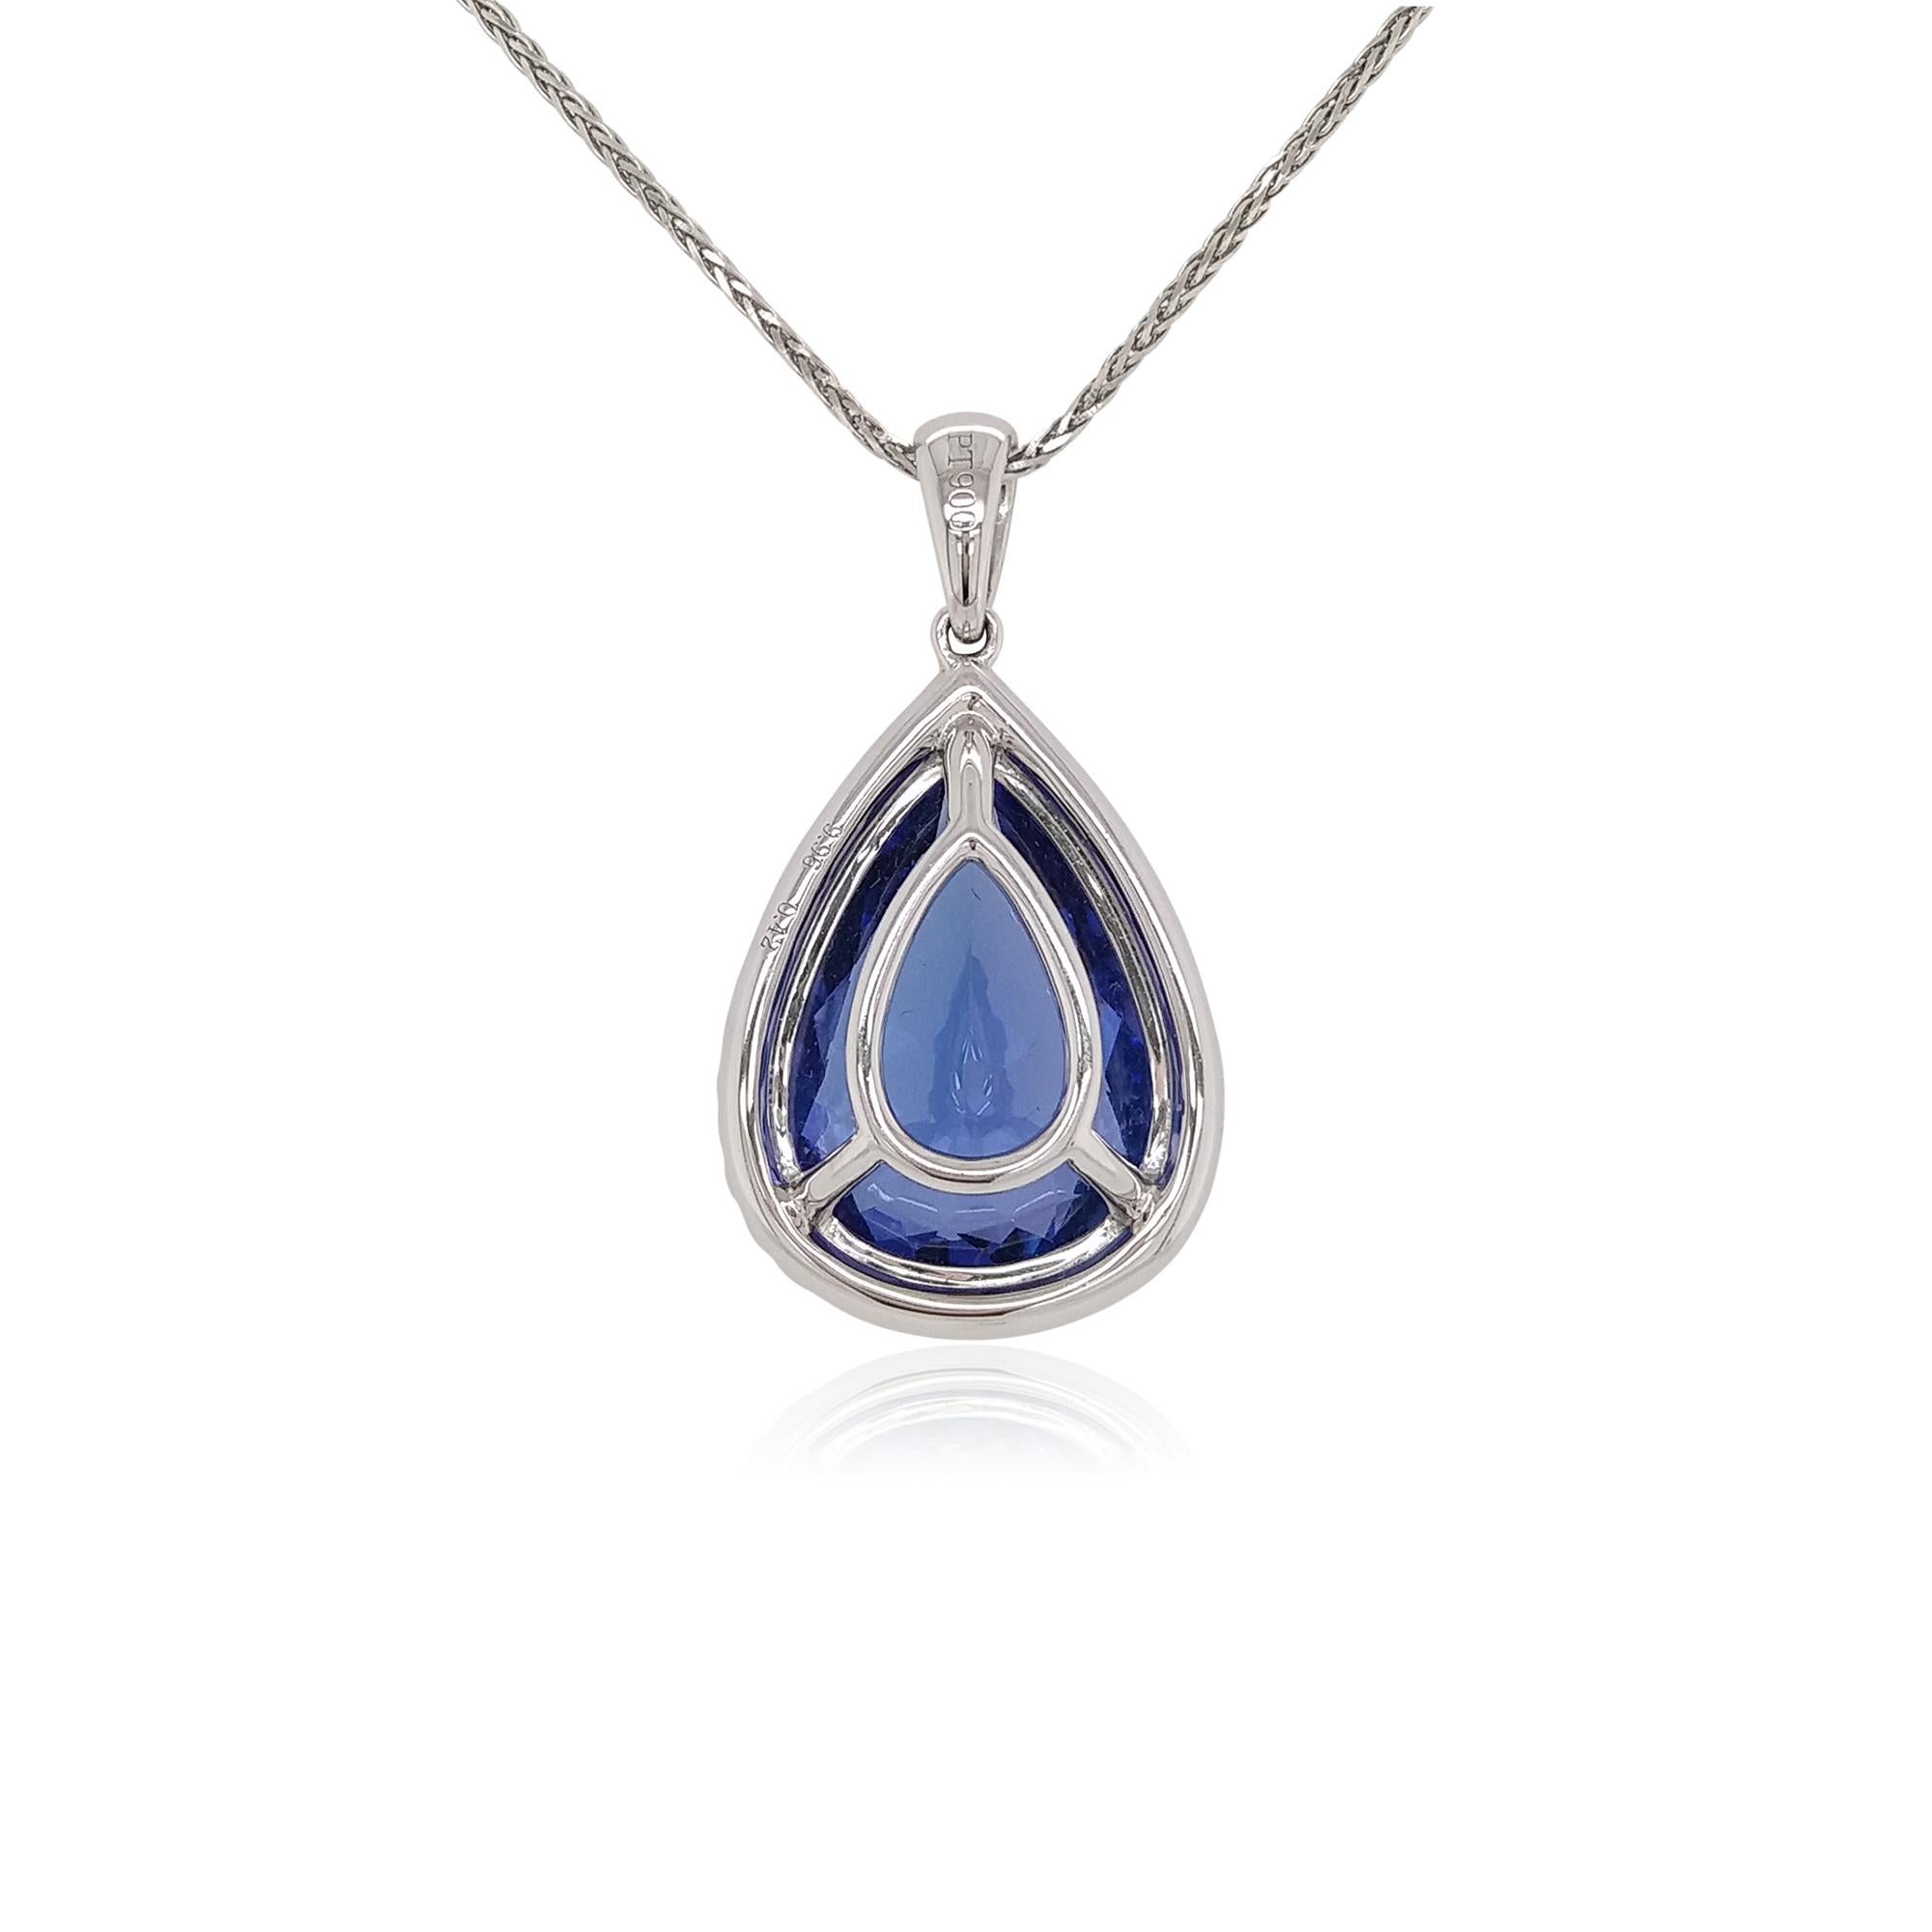 This unique platinum pendant design features a lustrous natural Tanzanite set amongst a contemporary design of White Diamonds. Set in Platinum to enrich the sparkle of the diamonds and the lustre of the Tanzanite, this elegant pendant is perfect for